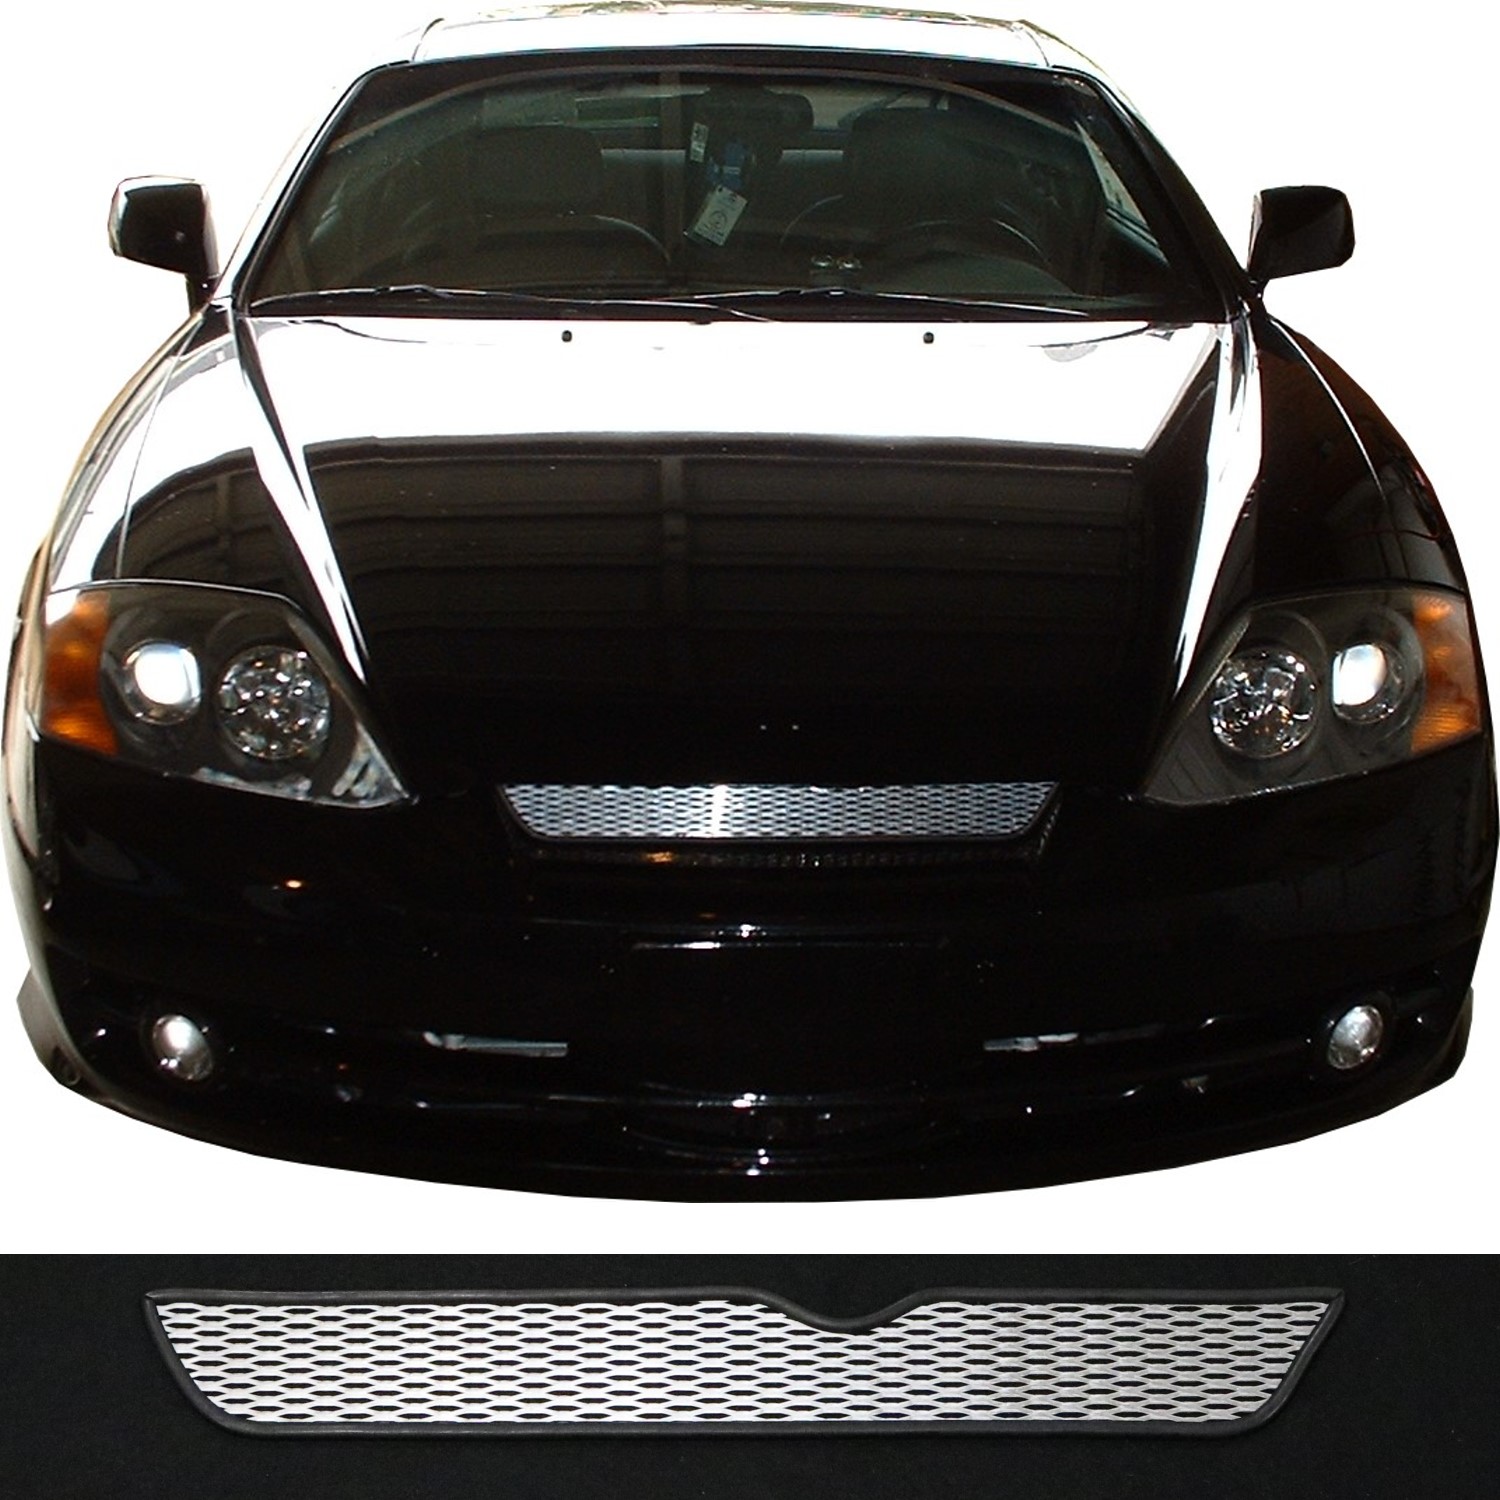  Grill Insert with Rubber Trim for 03 04 05 06 Hyundai Tiburon